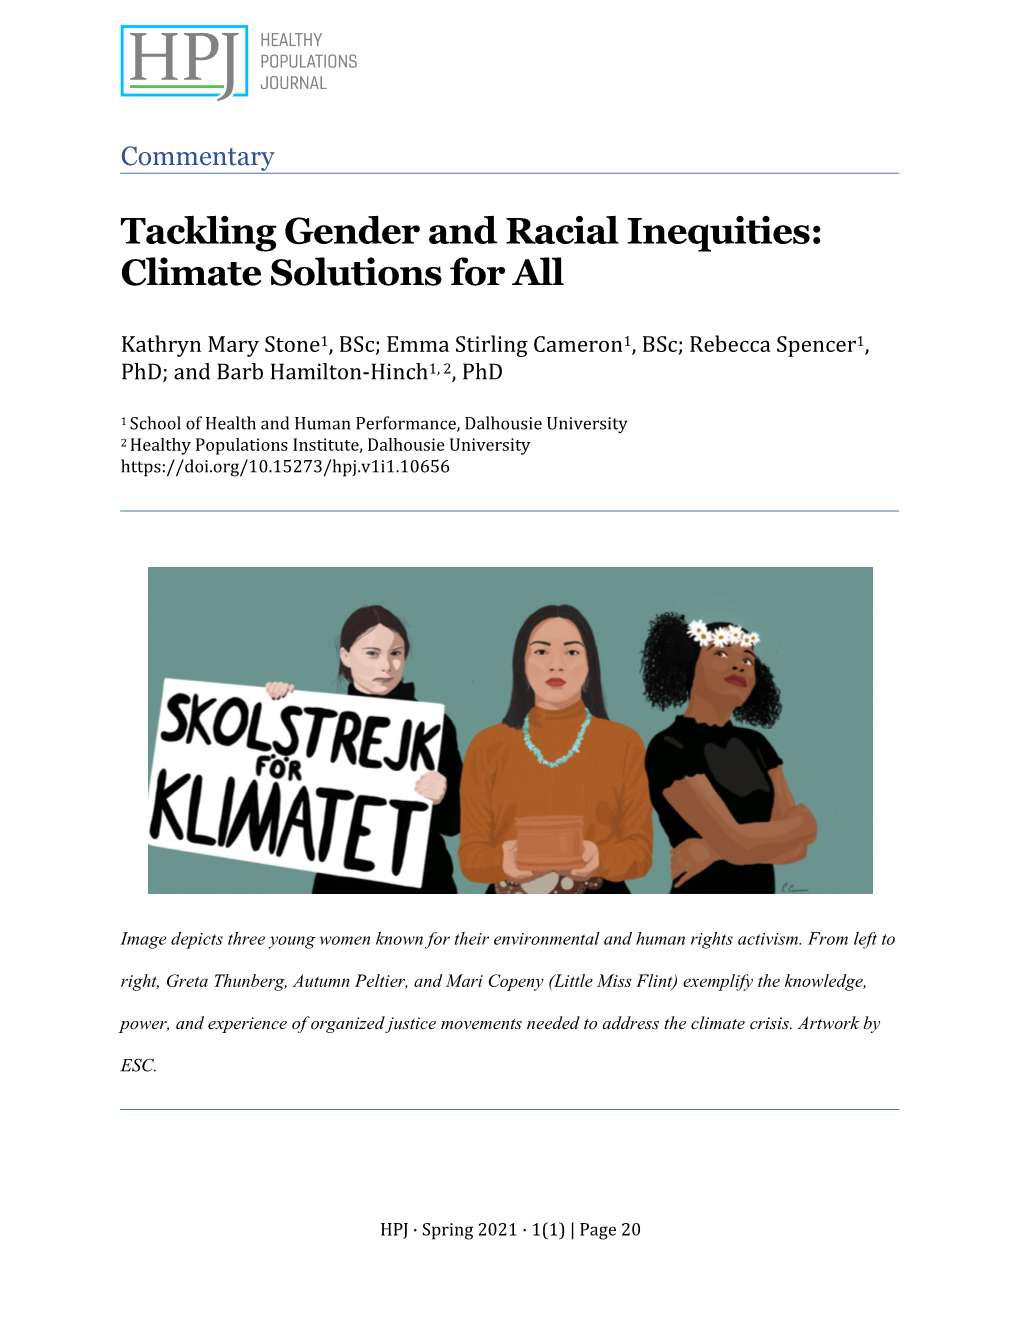 Tackling Gender and Racial Inequities: Climate Solutions for All